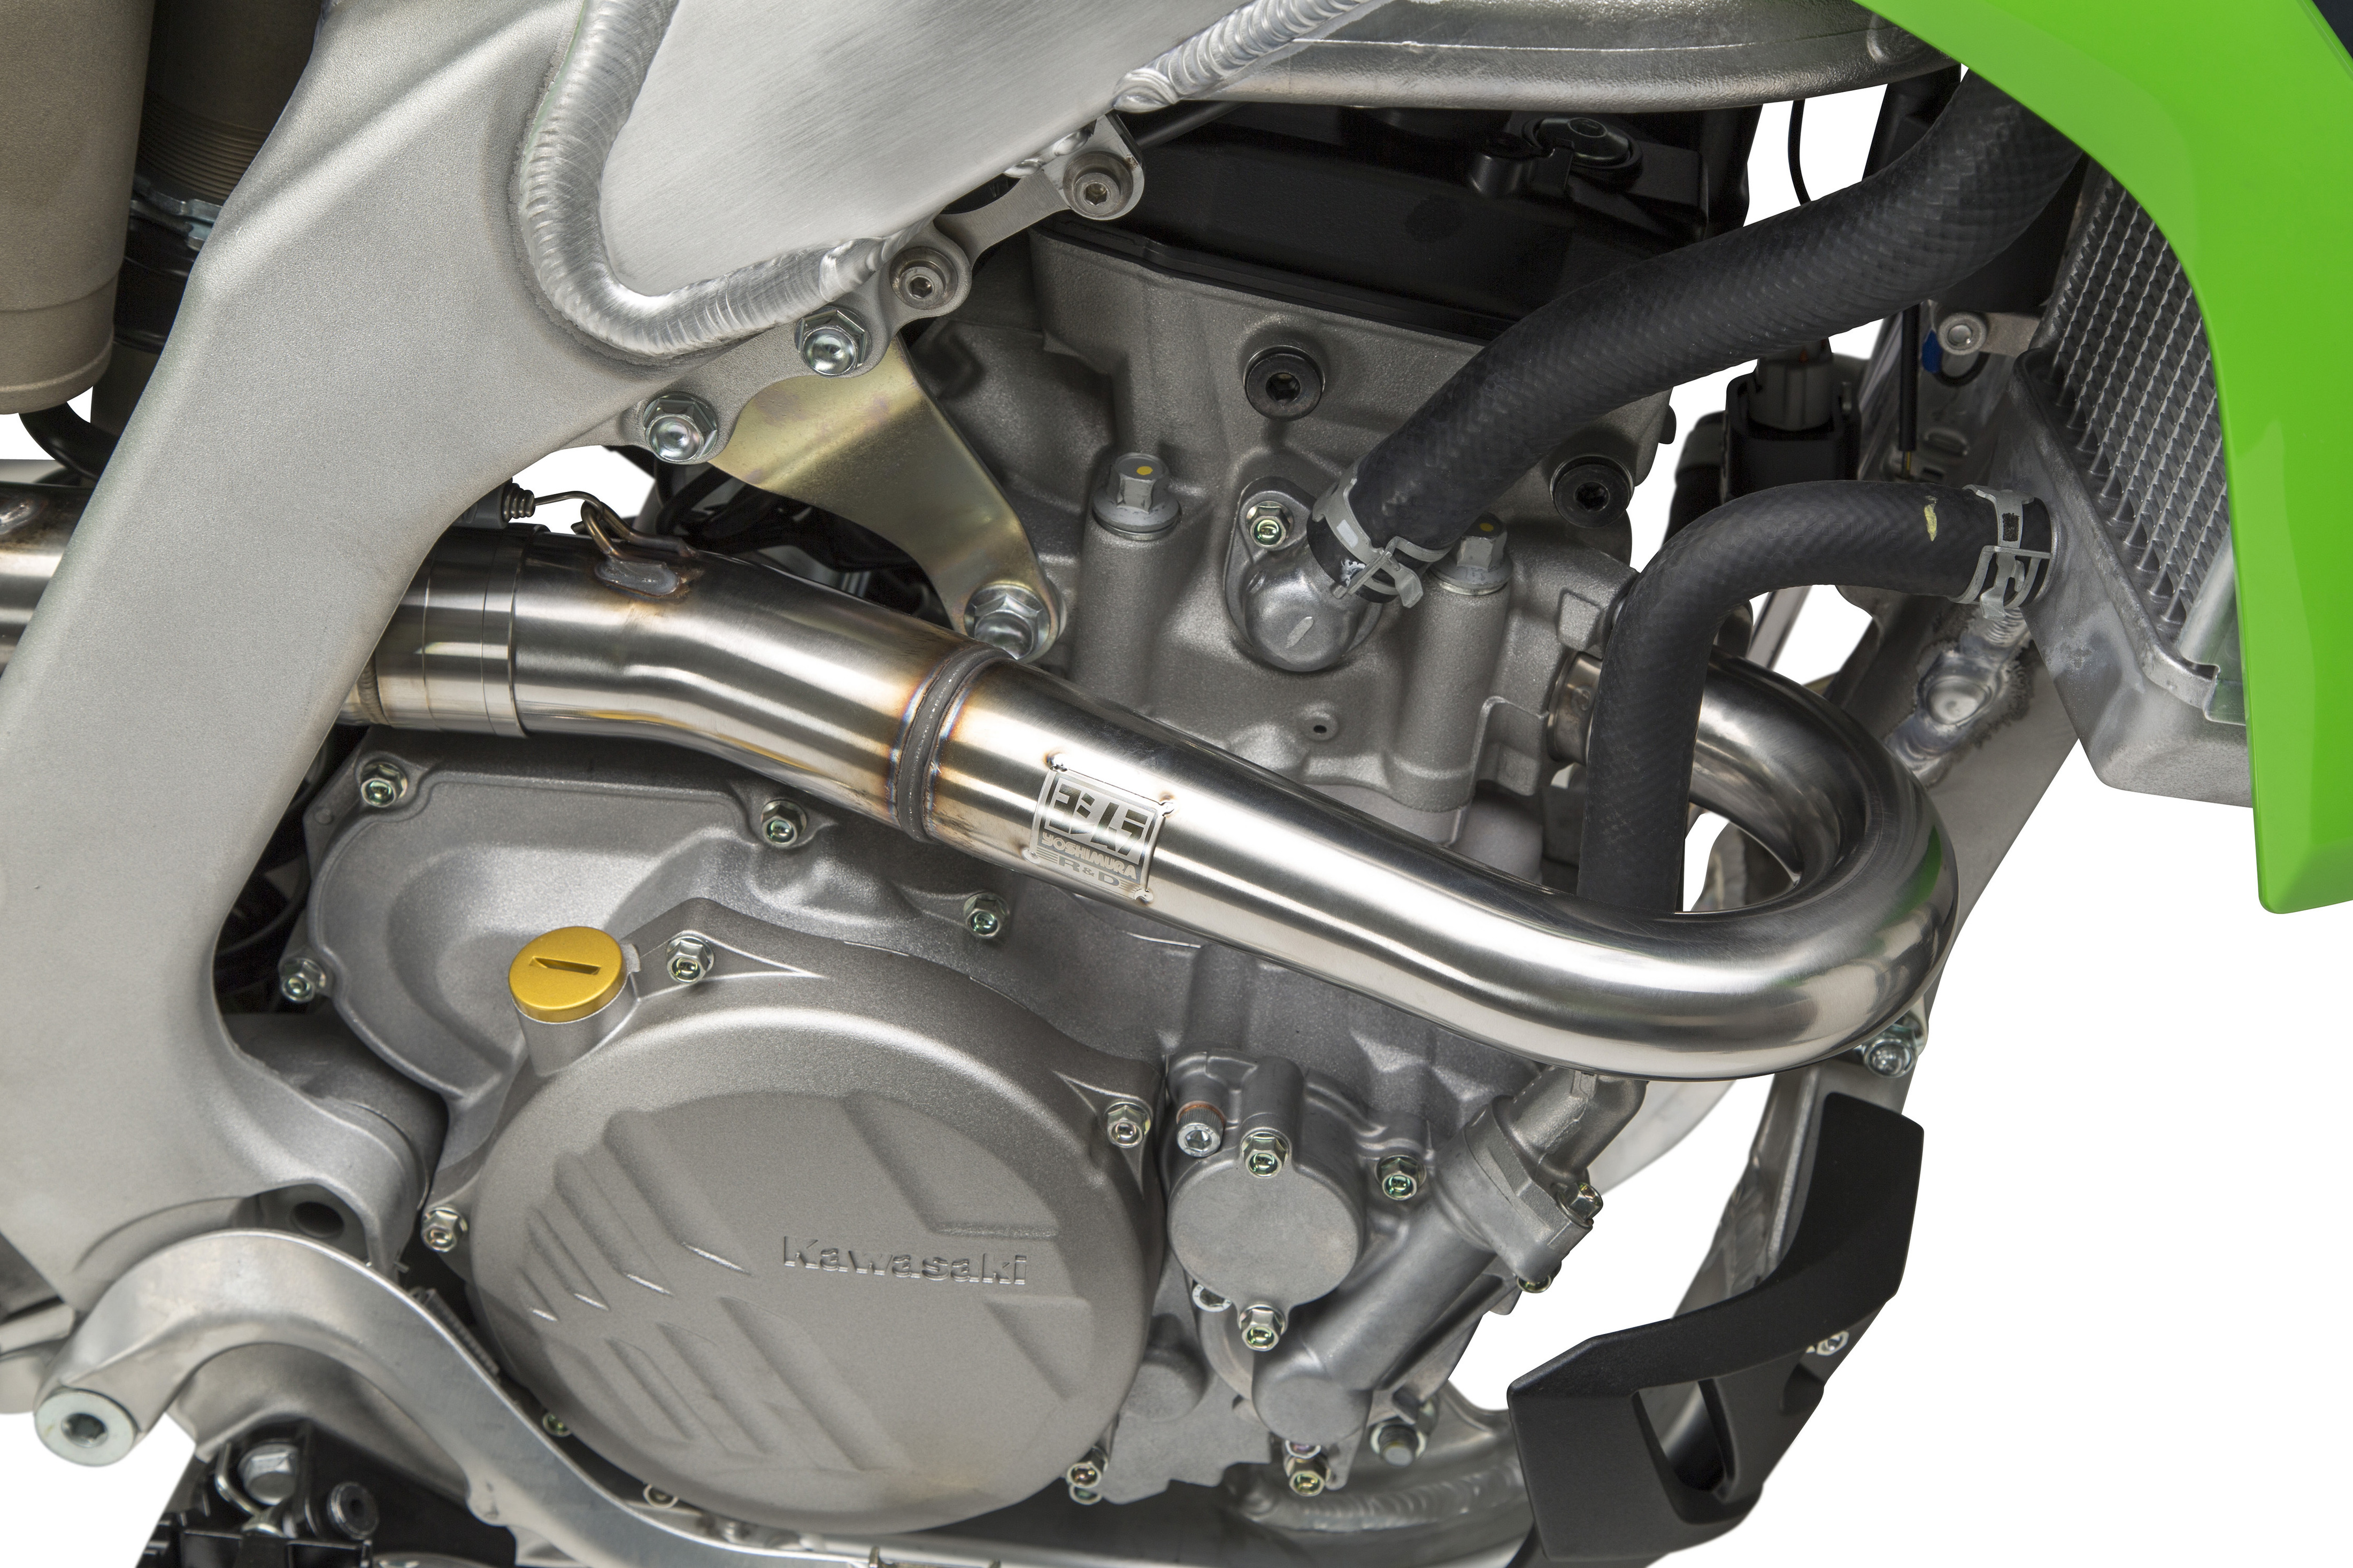 RS-12 Stainless Steel Full Exhaust w/ Aluminum Muffler - For 21-22 Kawasaki KX250F/X - Click Image to Close